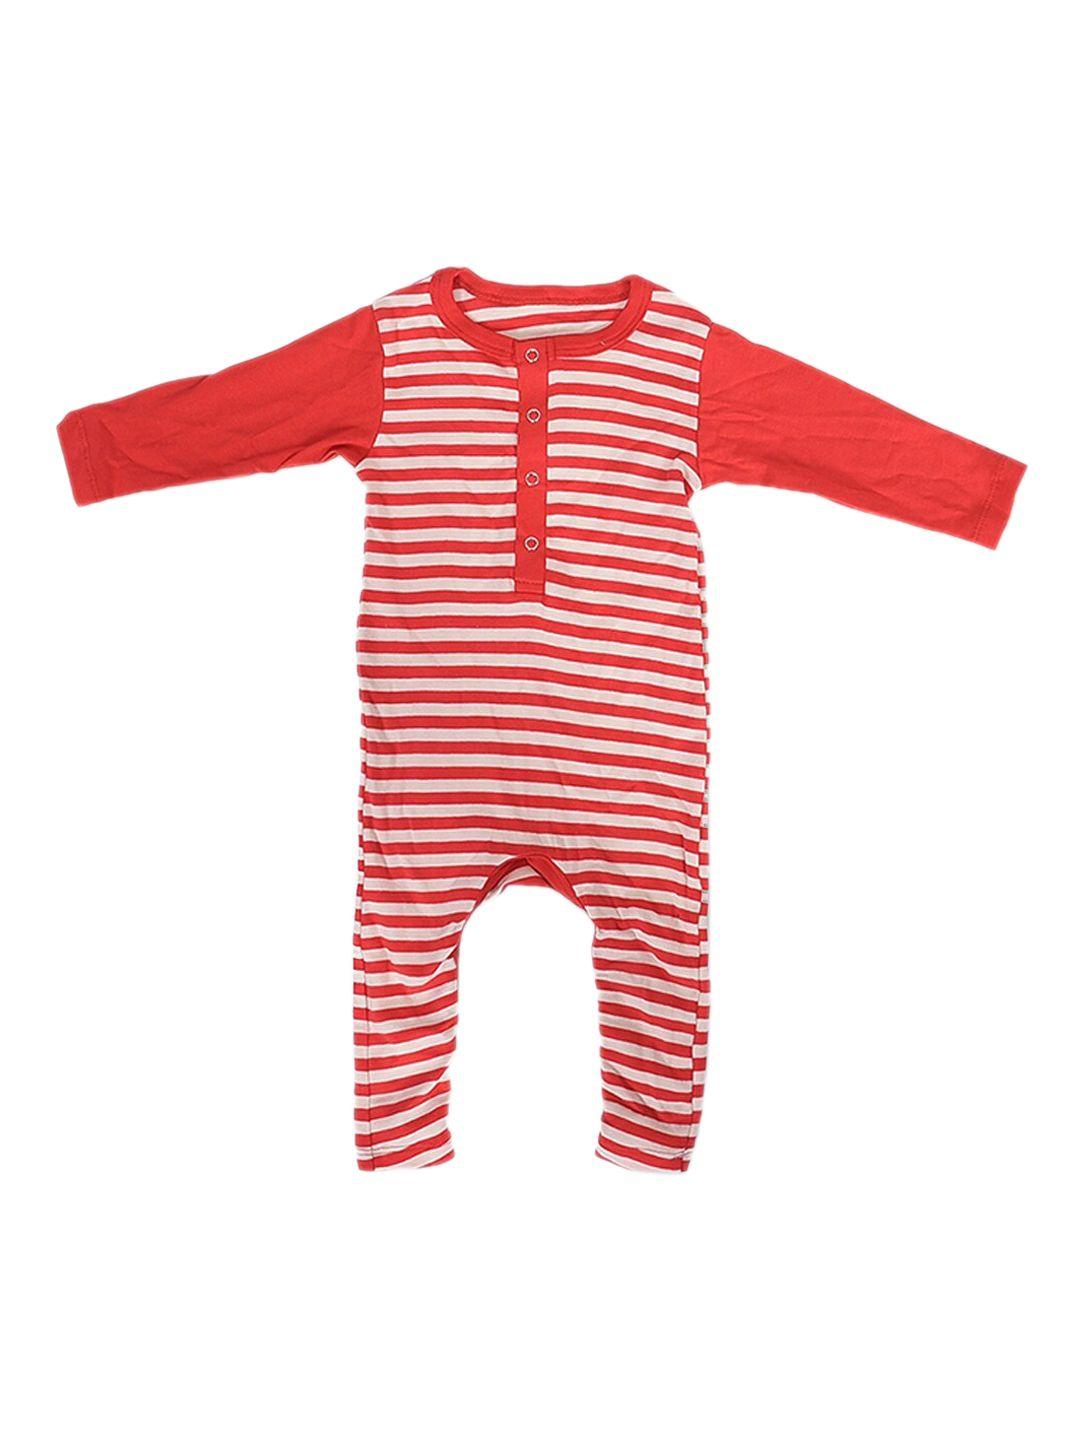 moms home unisex kids red and white striped rompers